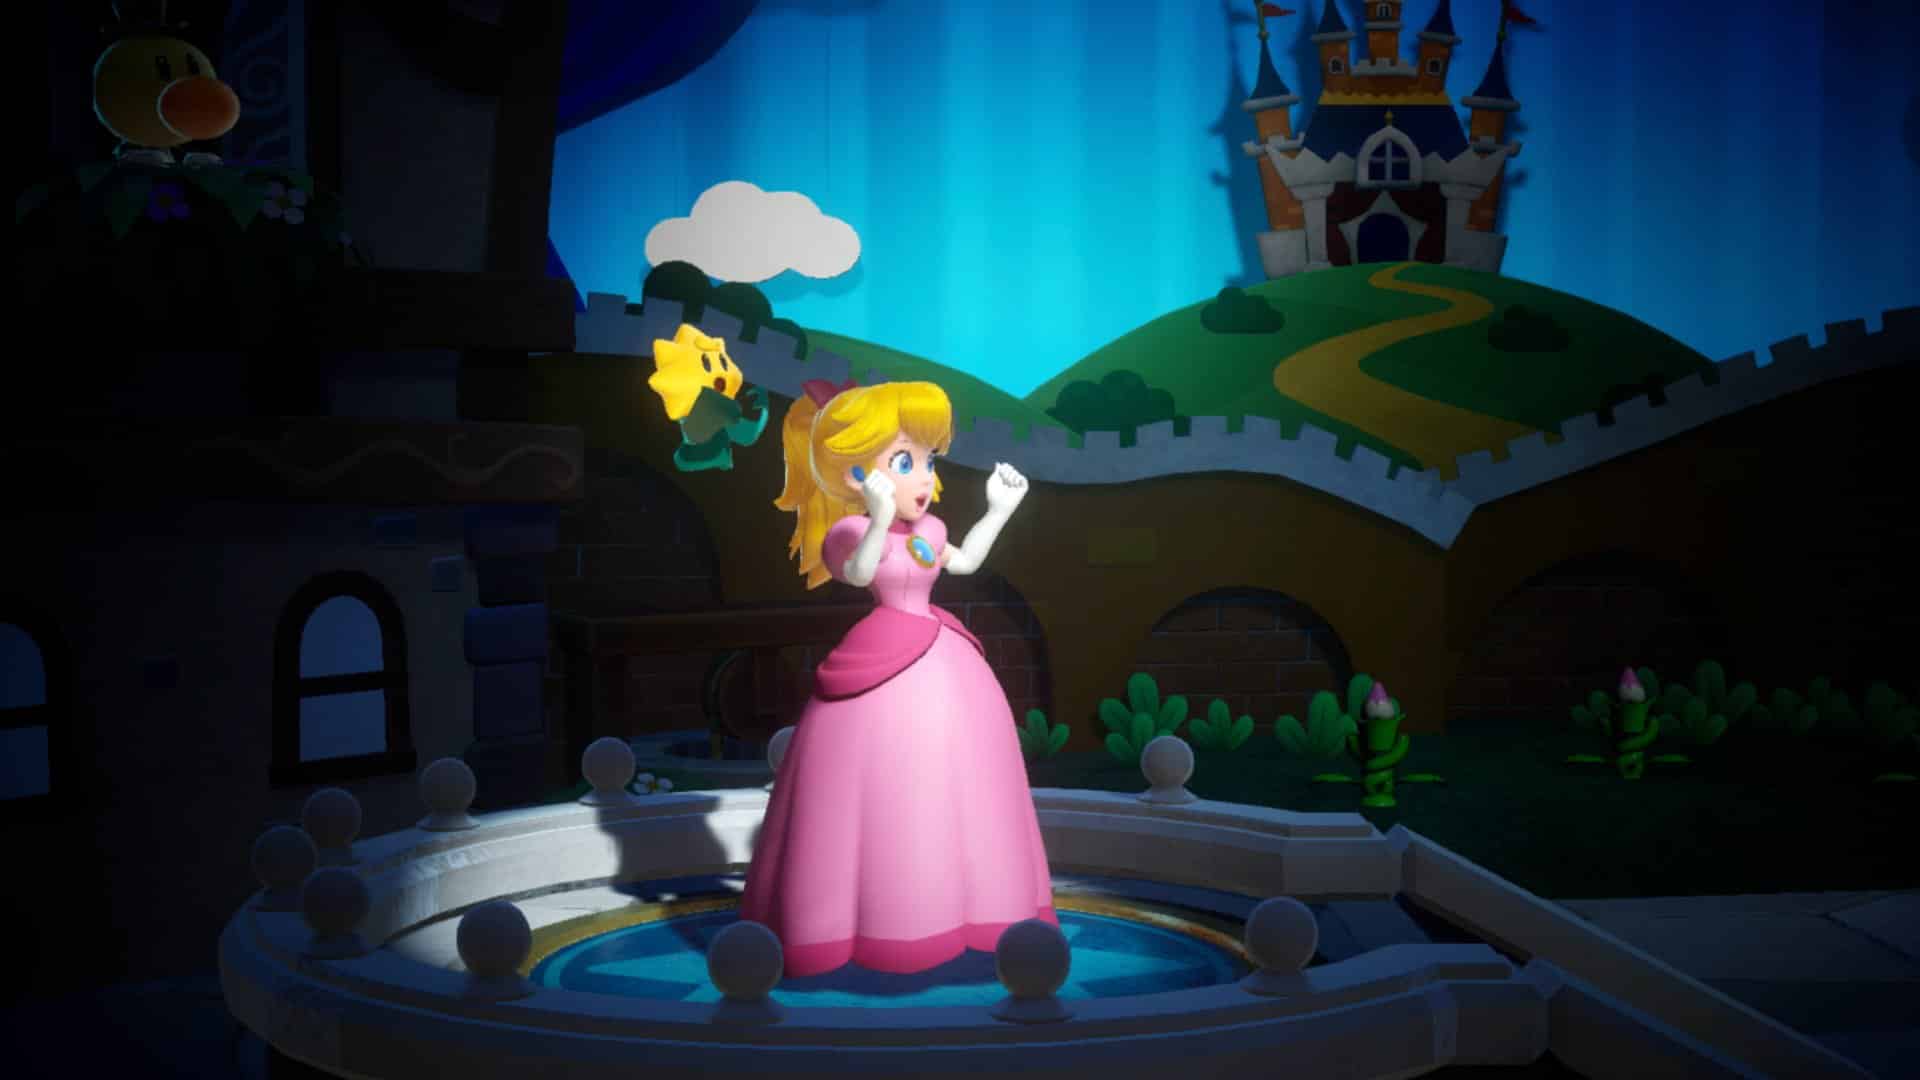 The new Princess Peach game is a chance for redemption